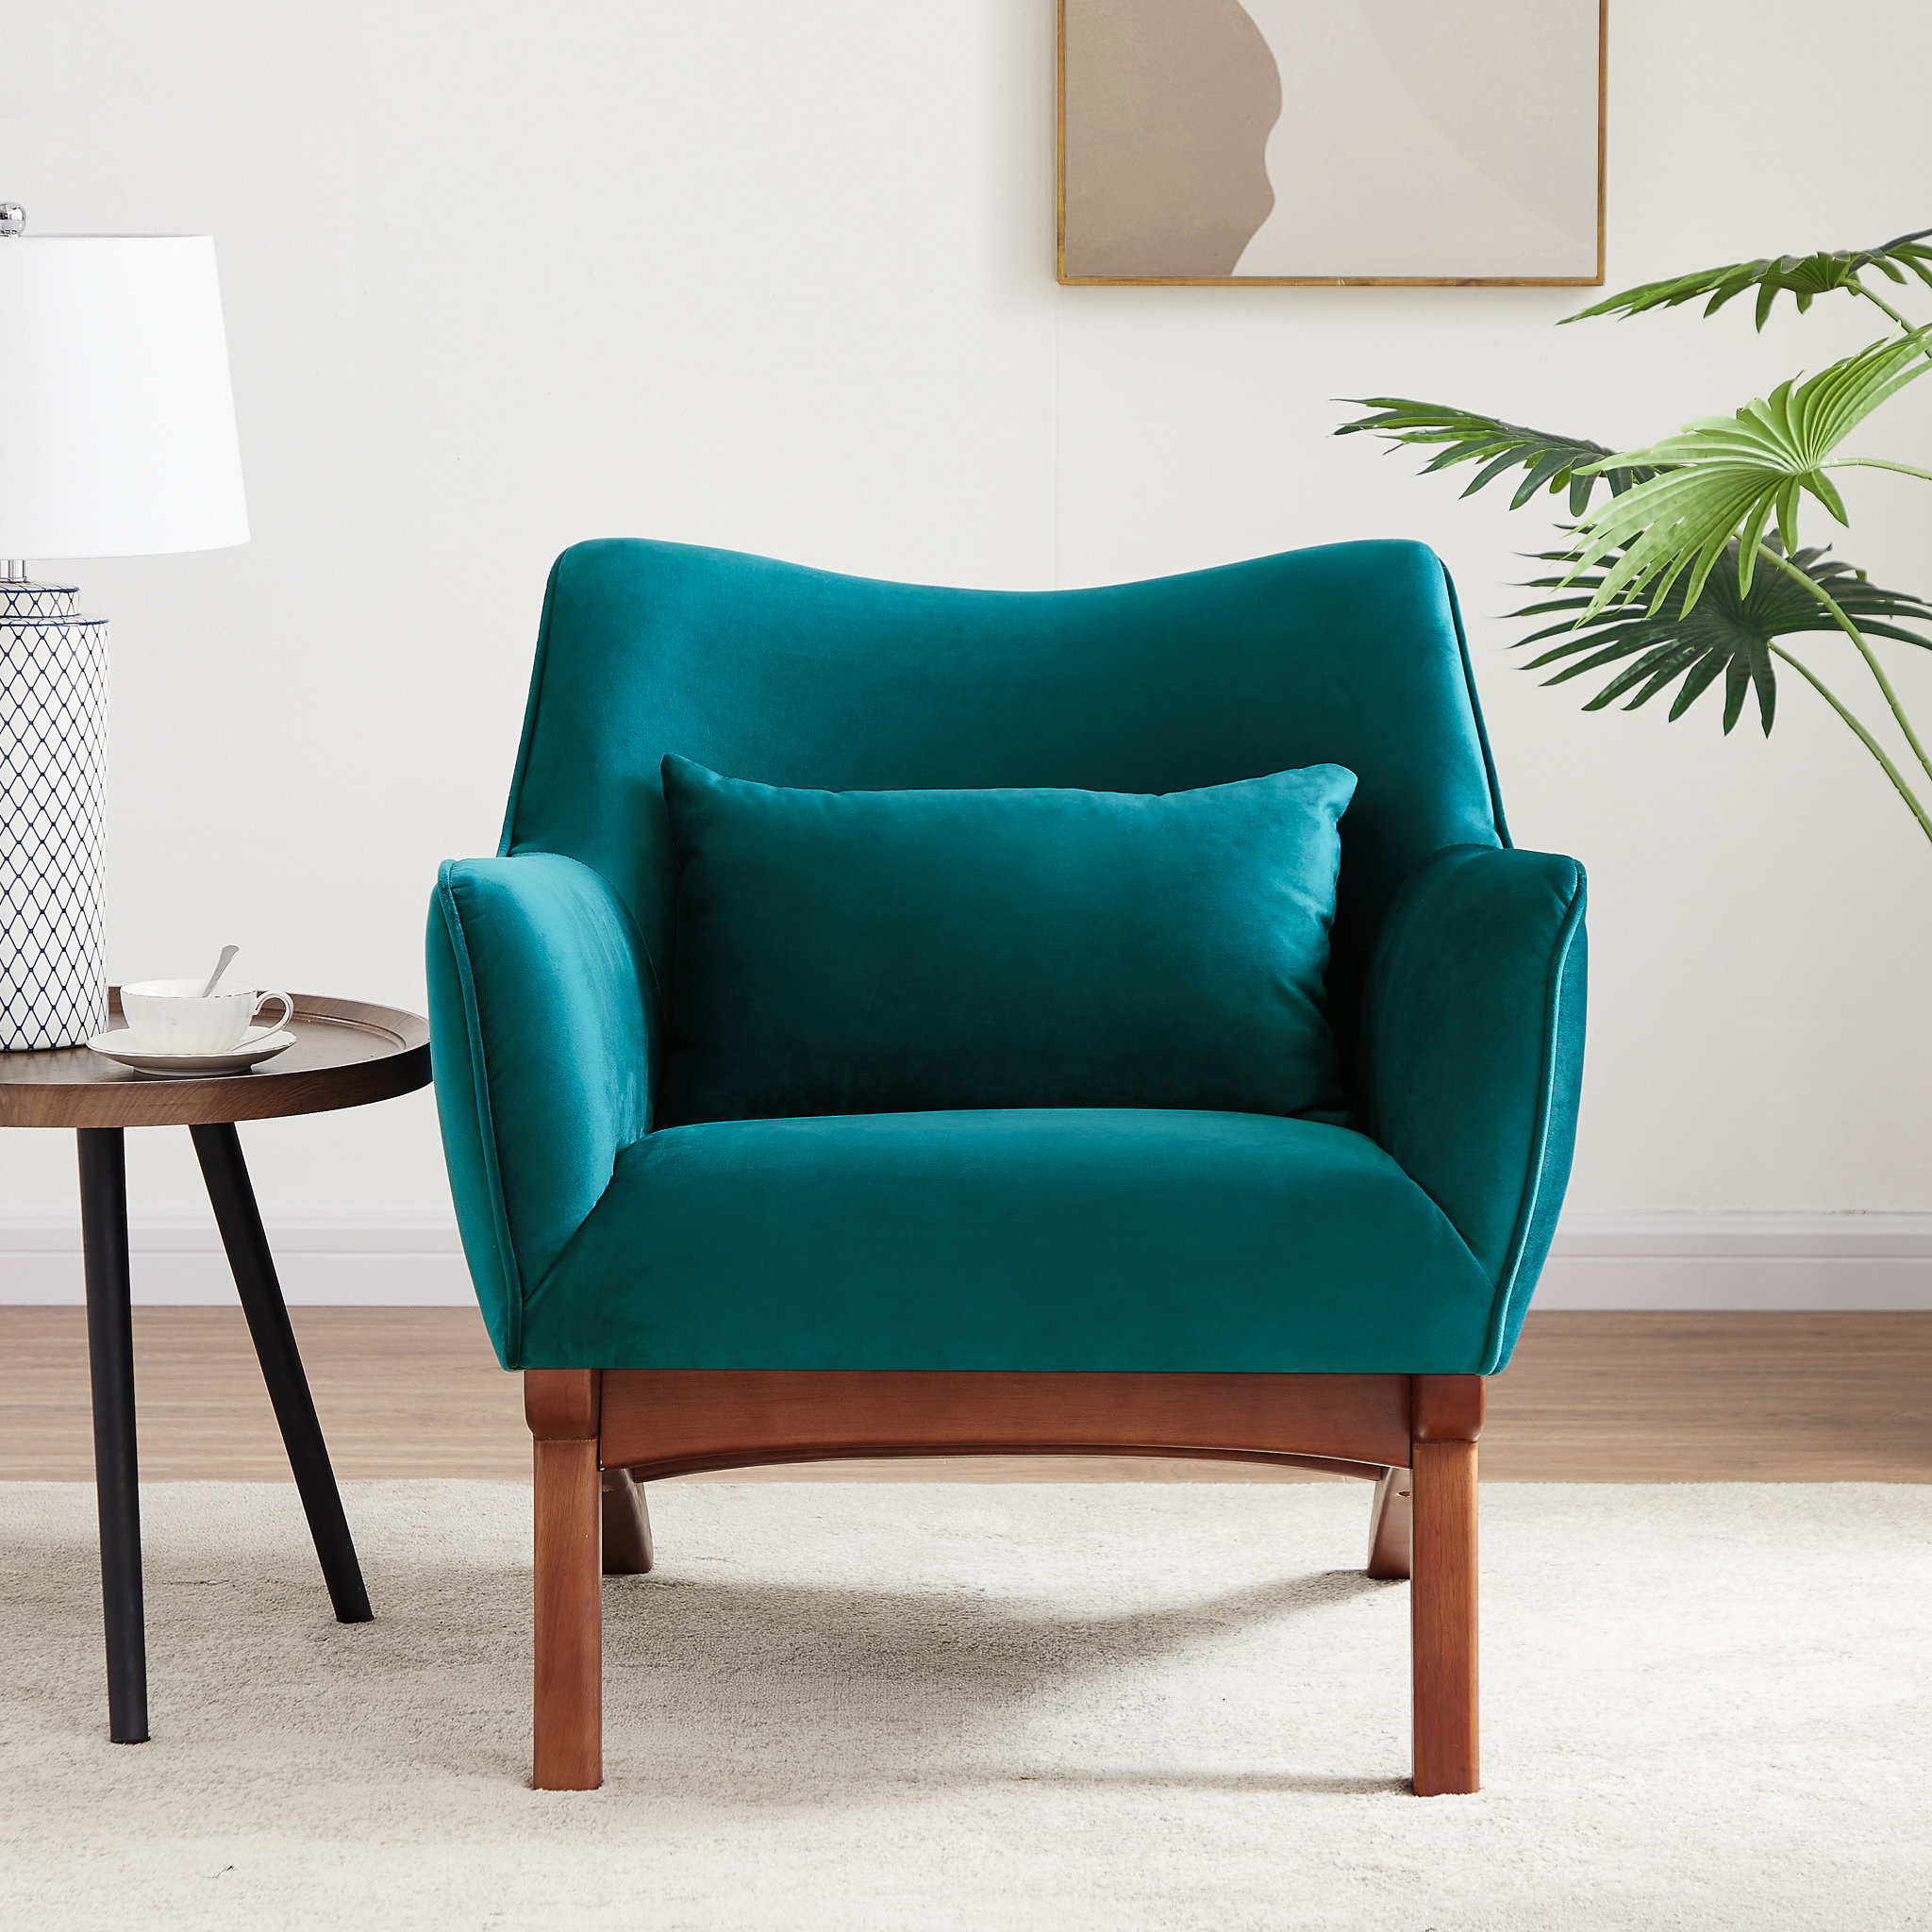 The 10 Best Reading Chairs of 2022, According to an Interior Designer